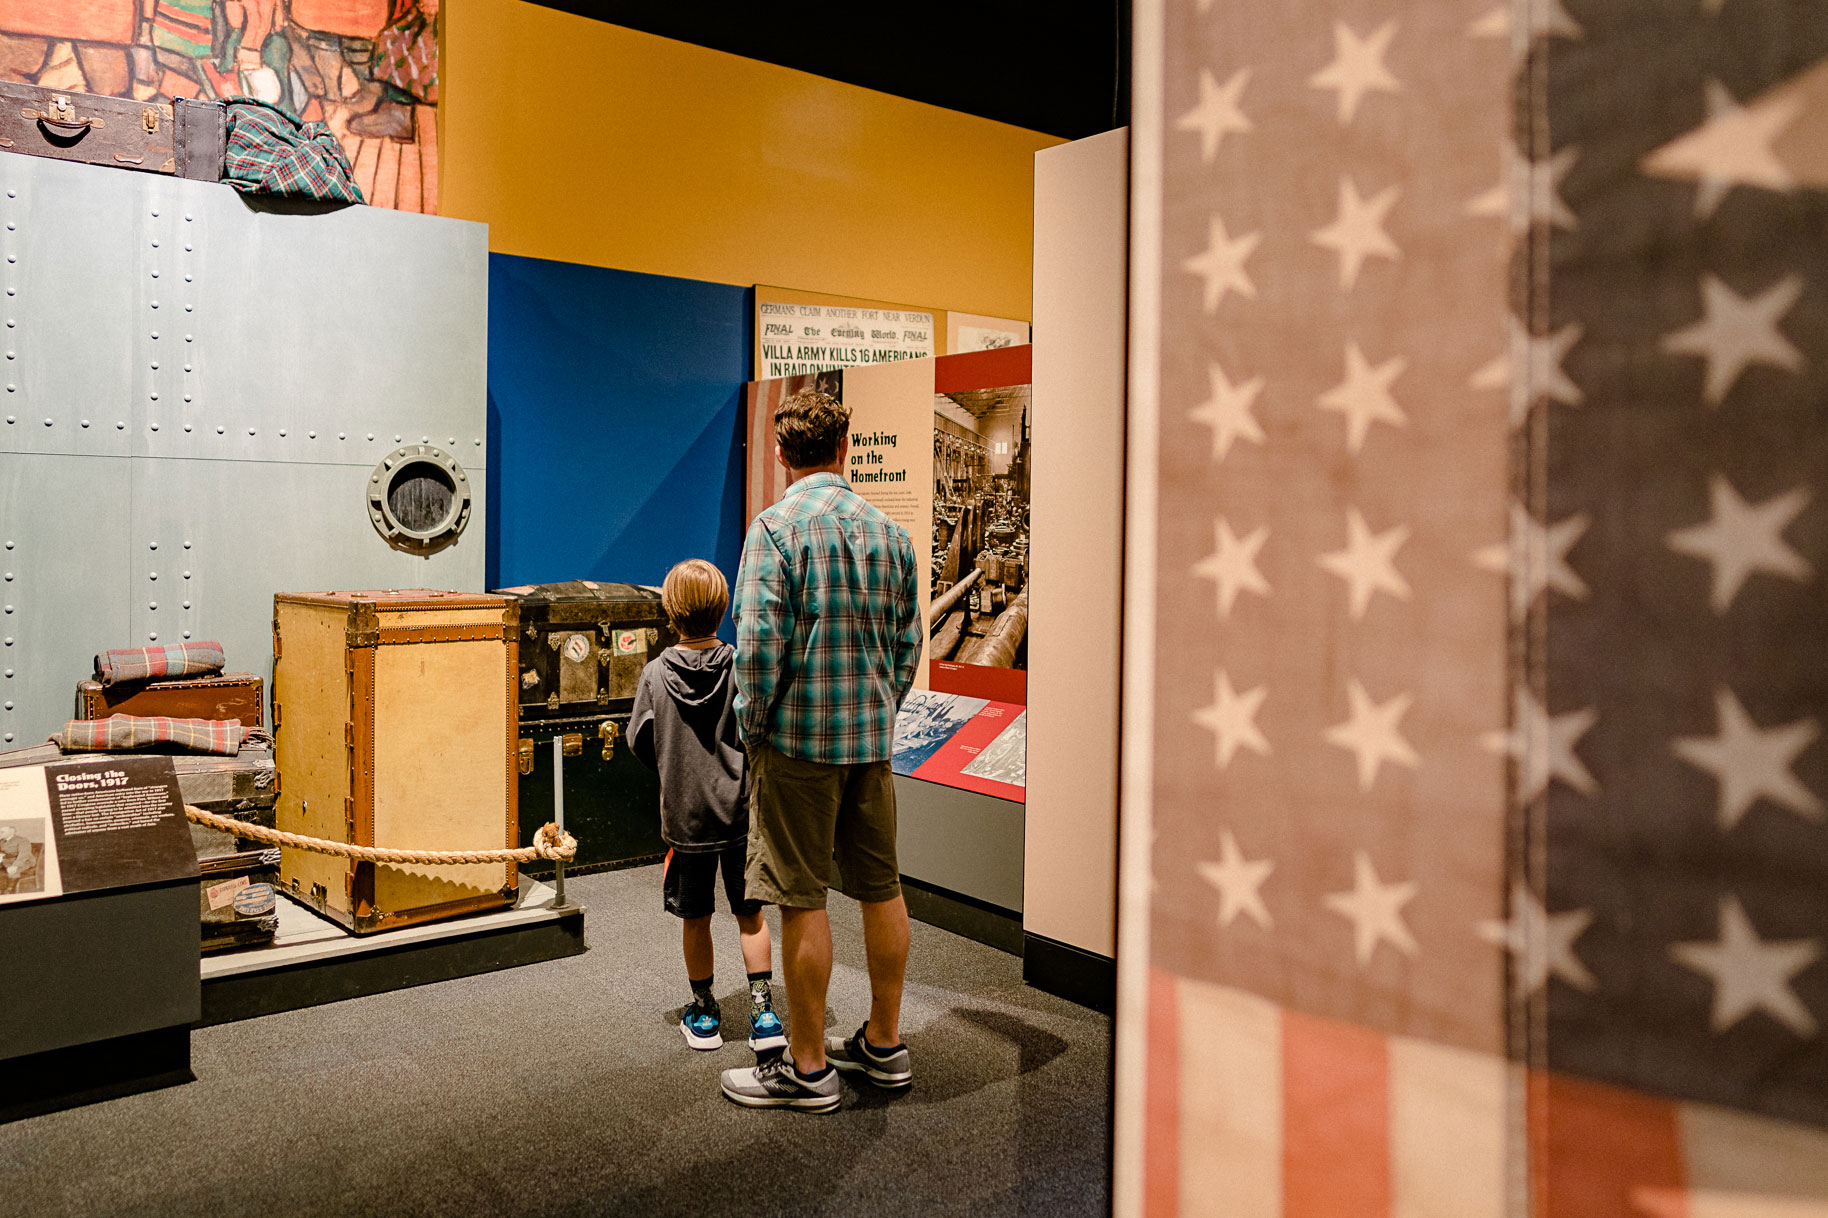 Throughout the summer, military families can enjoy free access to exhibitions at the Bullock Museum, including the special exhibition WWI America.